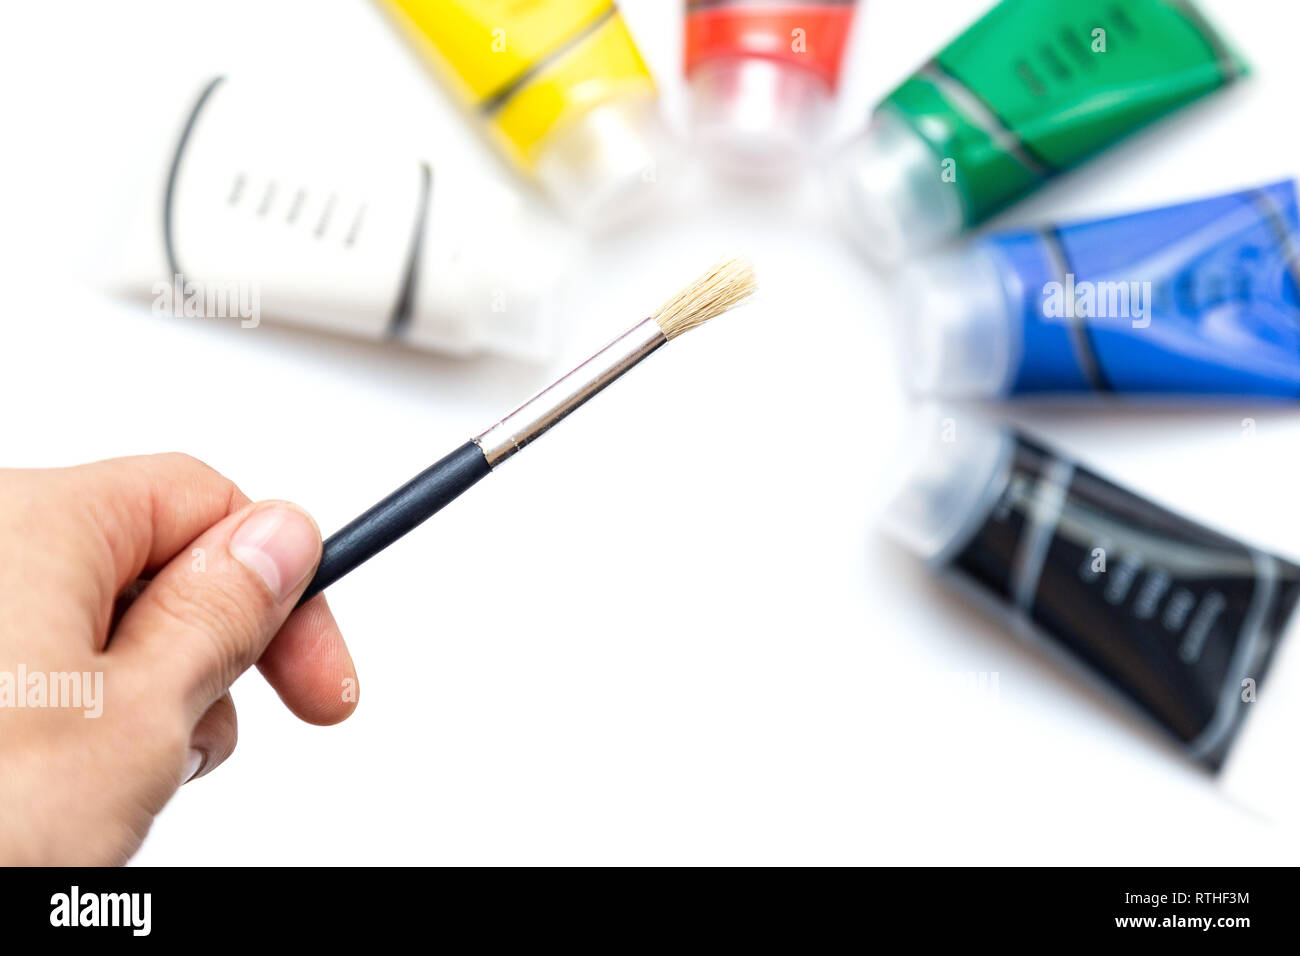 Man holding paint brush over colored paint tubes Stock Photo